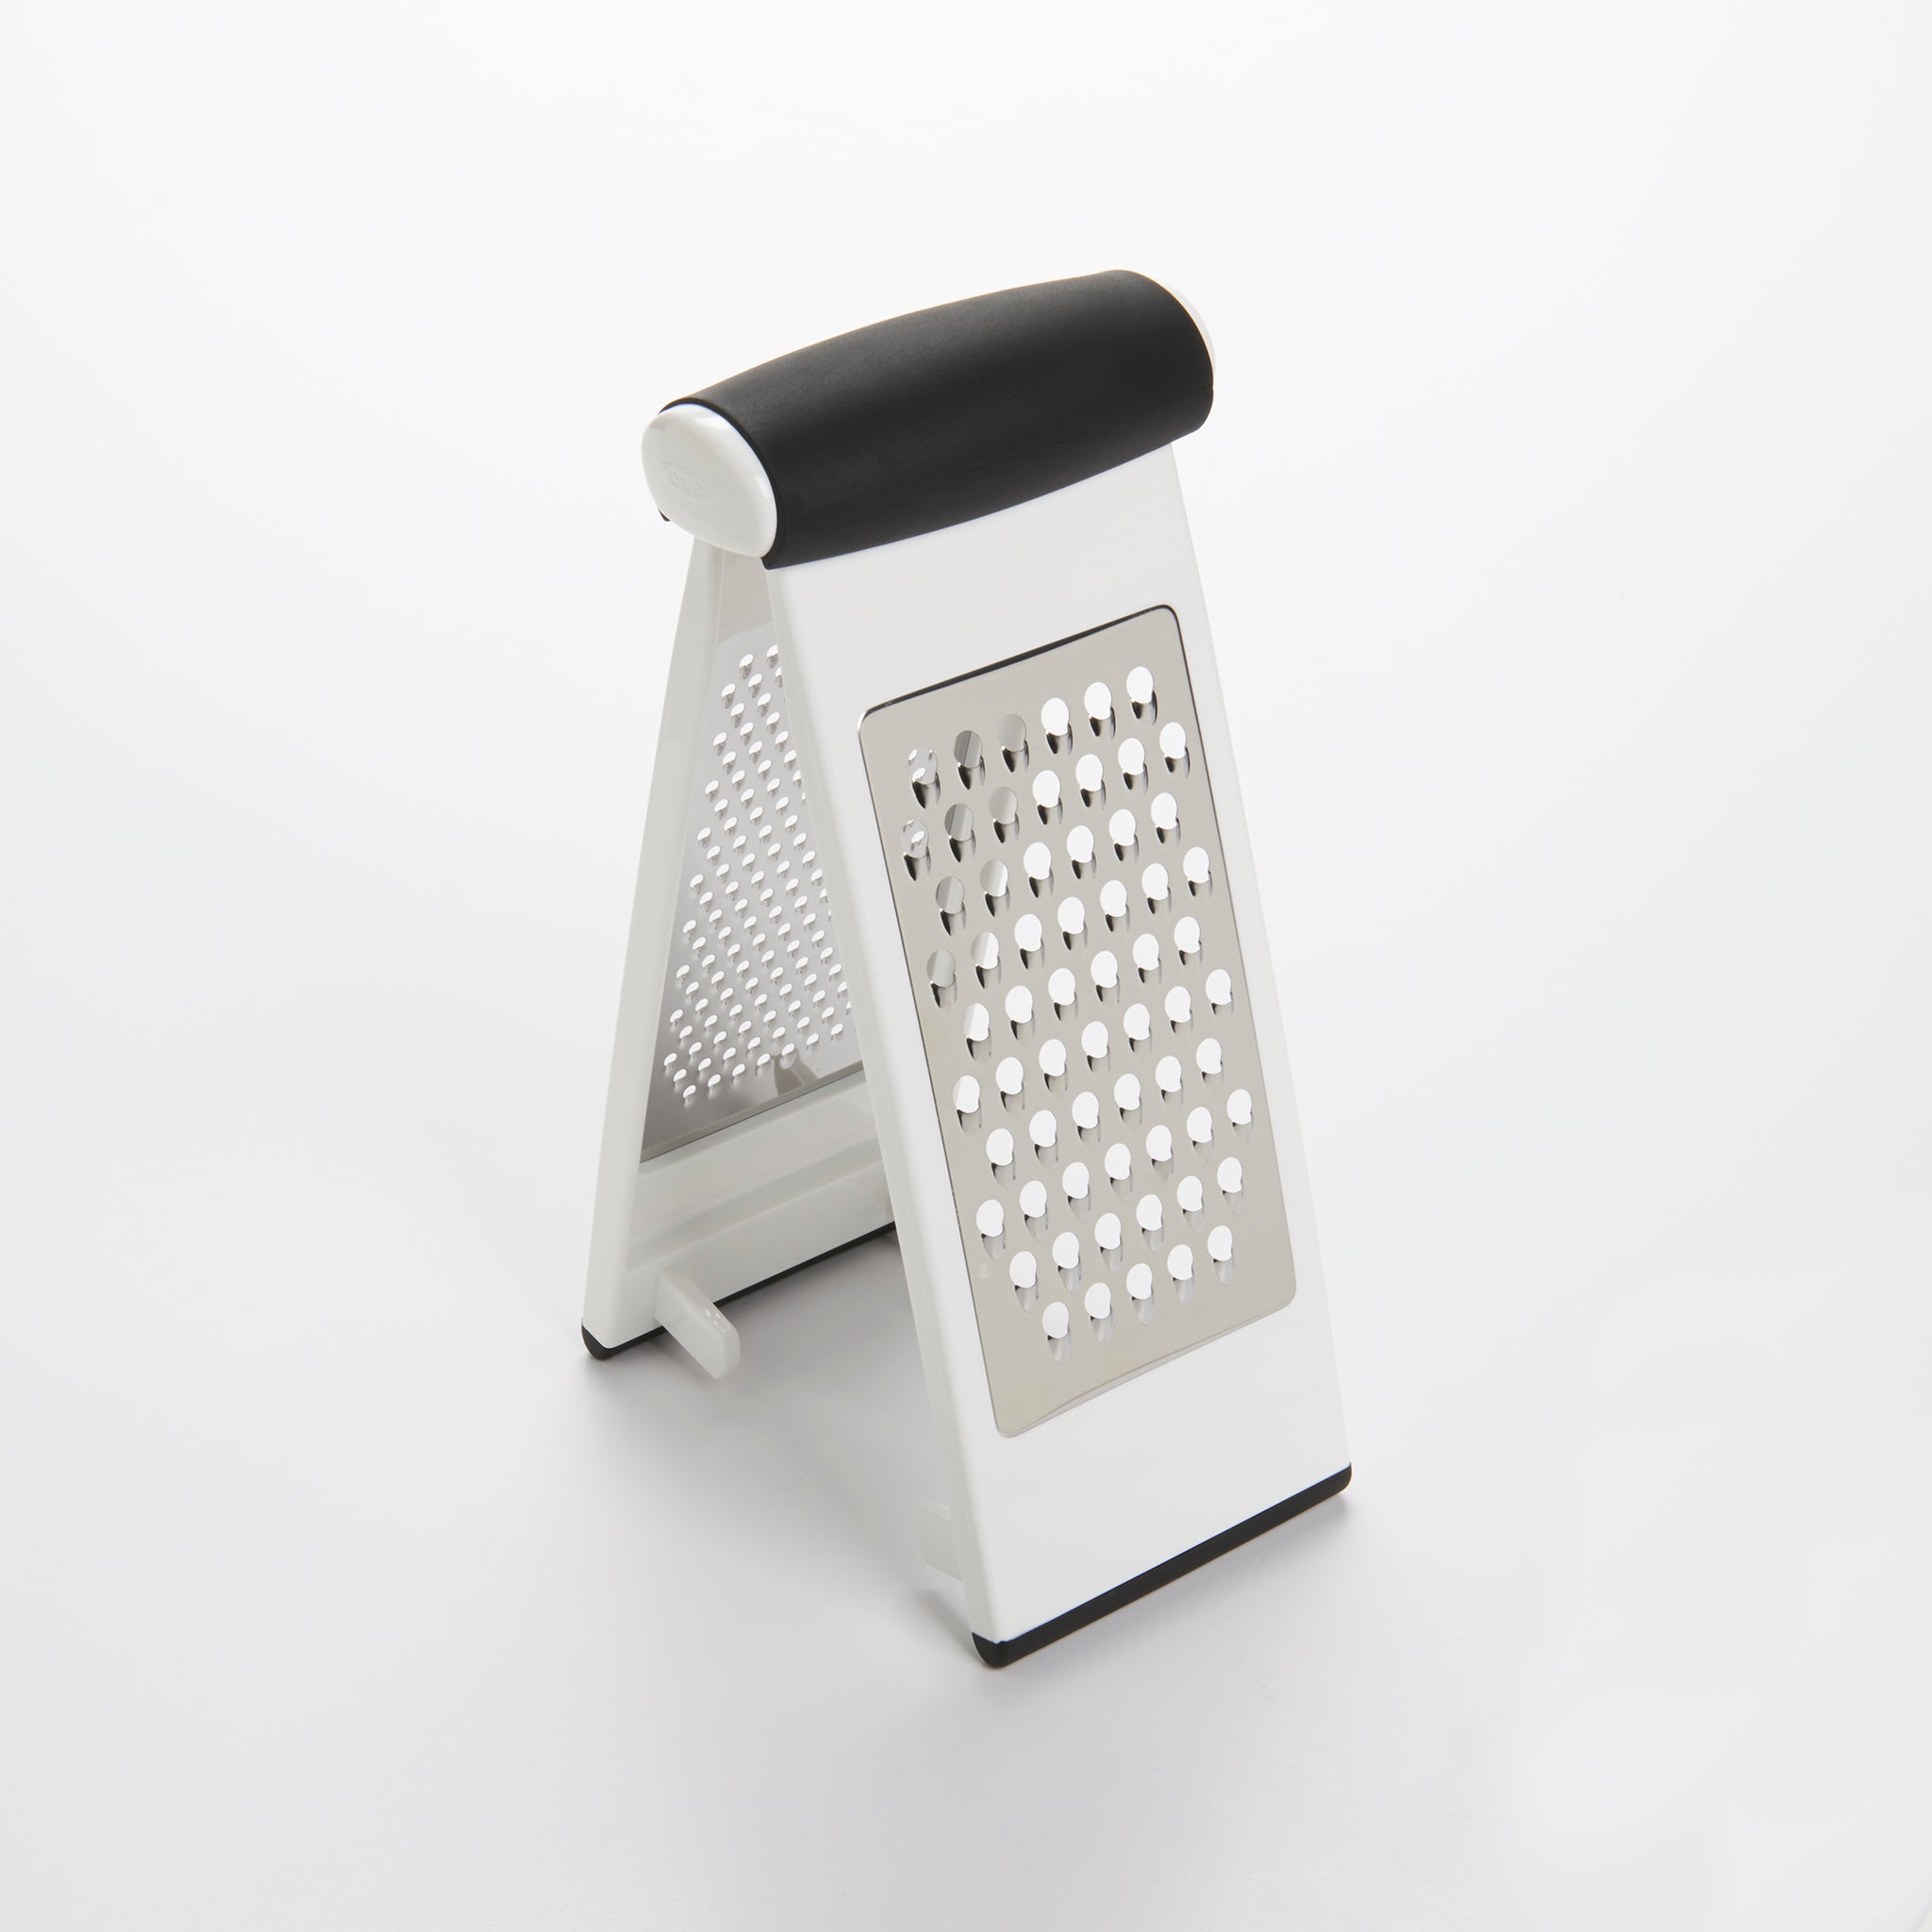 Oxo SoftWorks Grater